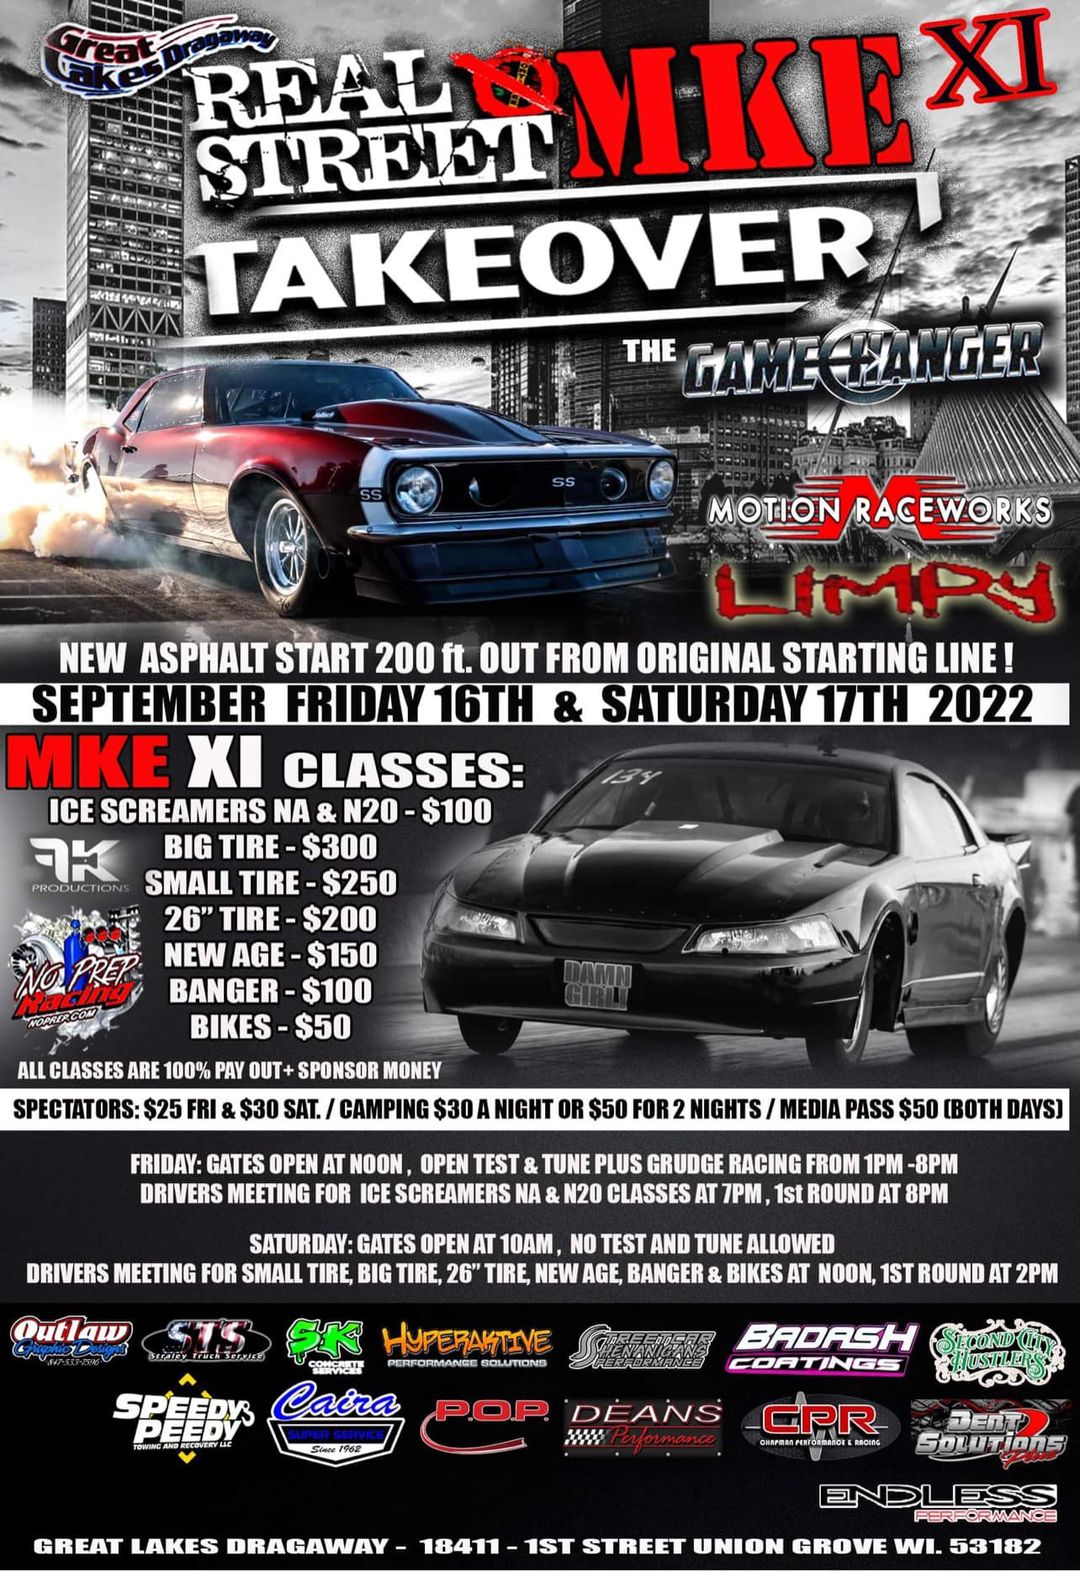 MKE Real Street Takeover XI "The Game Changer"